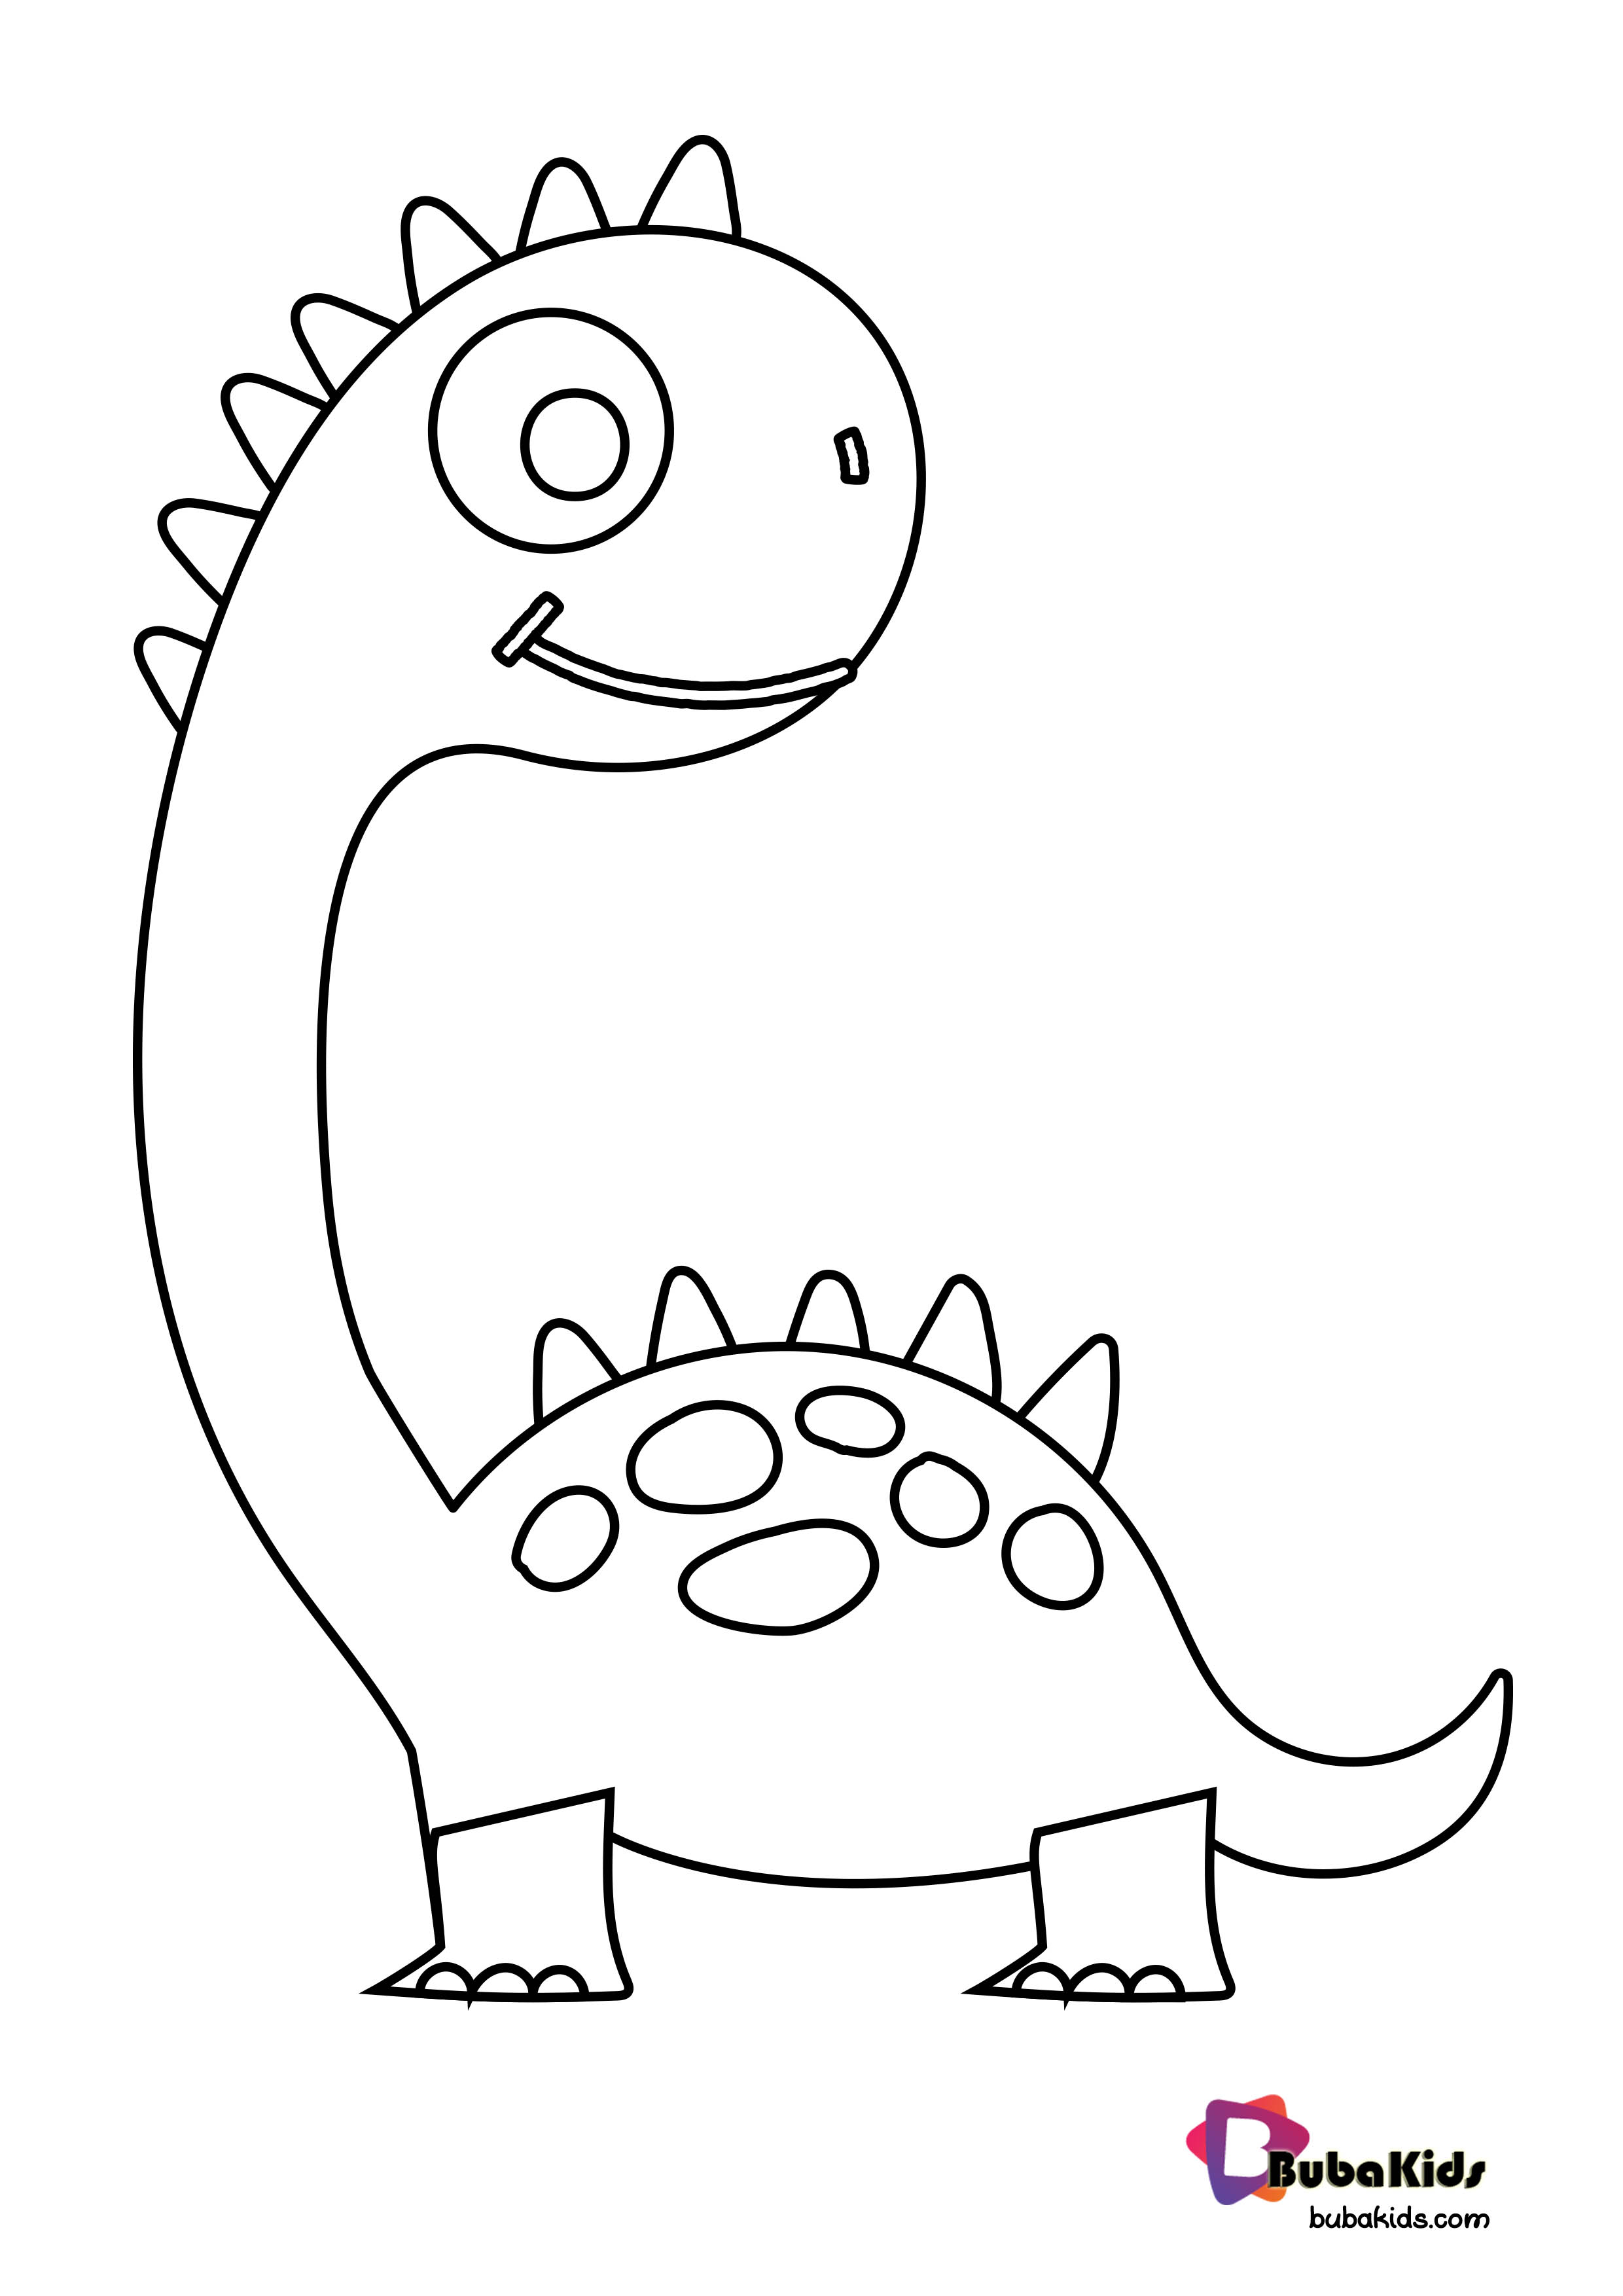 Cute Dinosaurs Coloring Page For Kids   BubaKids.com